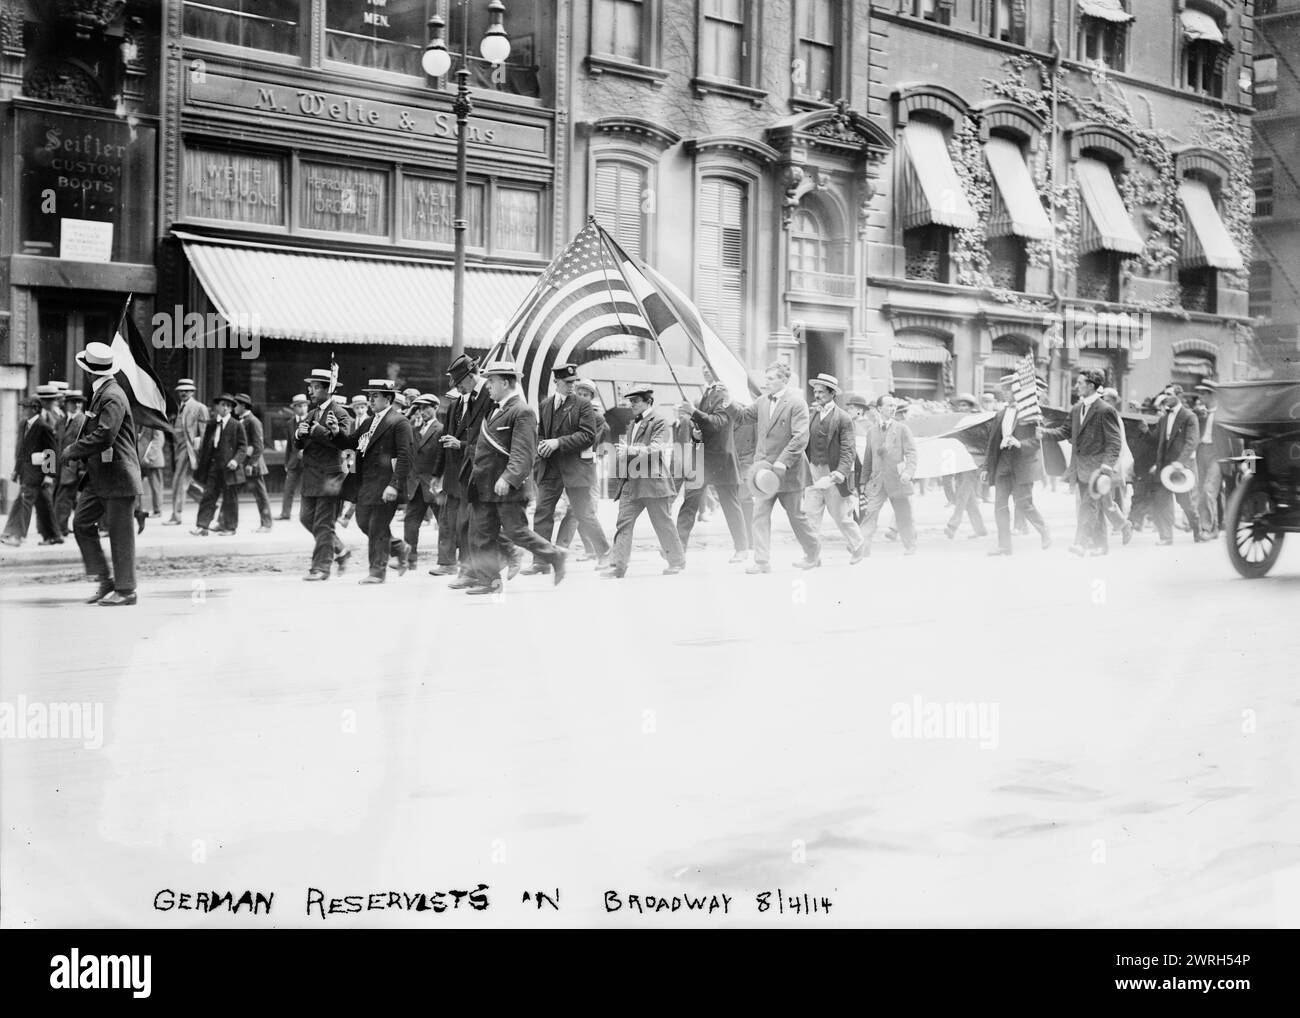 German Reservists in Broadway [i.e., Fifth Avenue], 4 Aug 1914 (date created or published later). German reserve soldiers marching on Fifth Avenue, New York City at start of World War I. Stock Photo